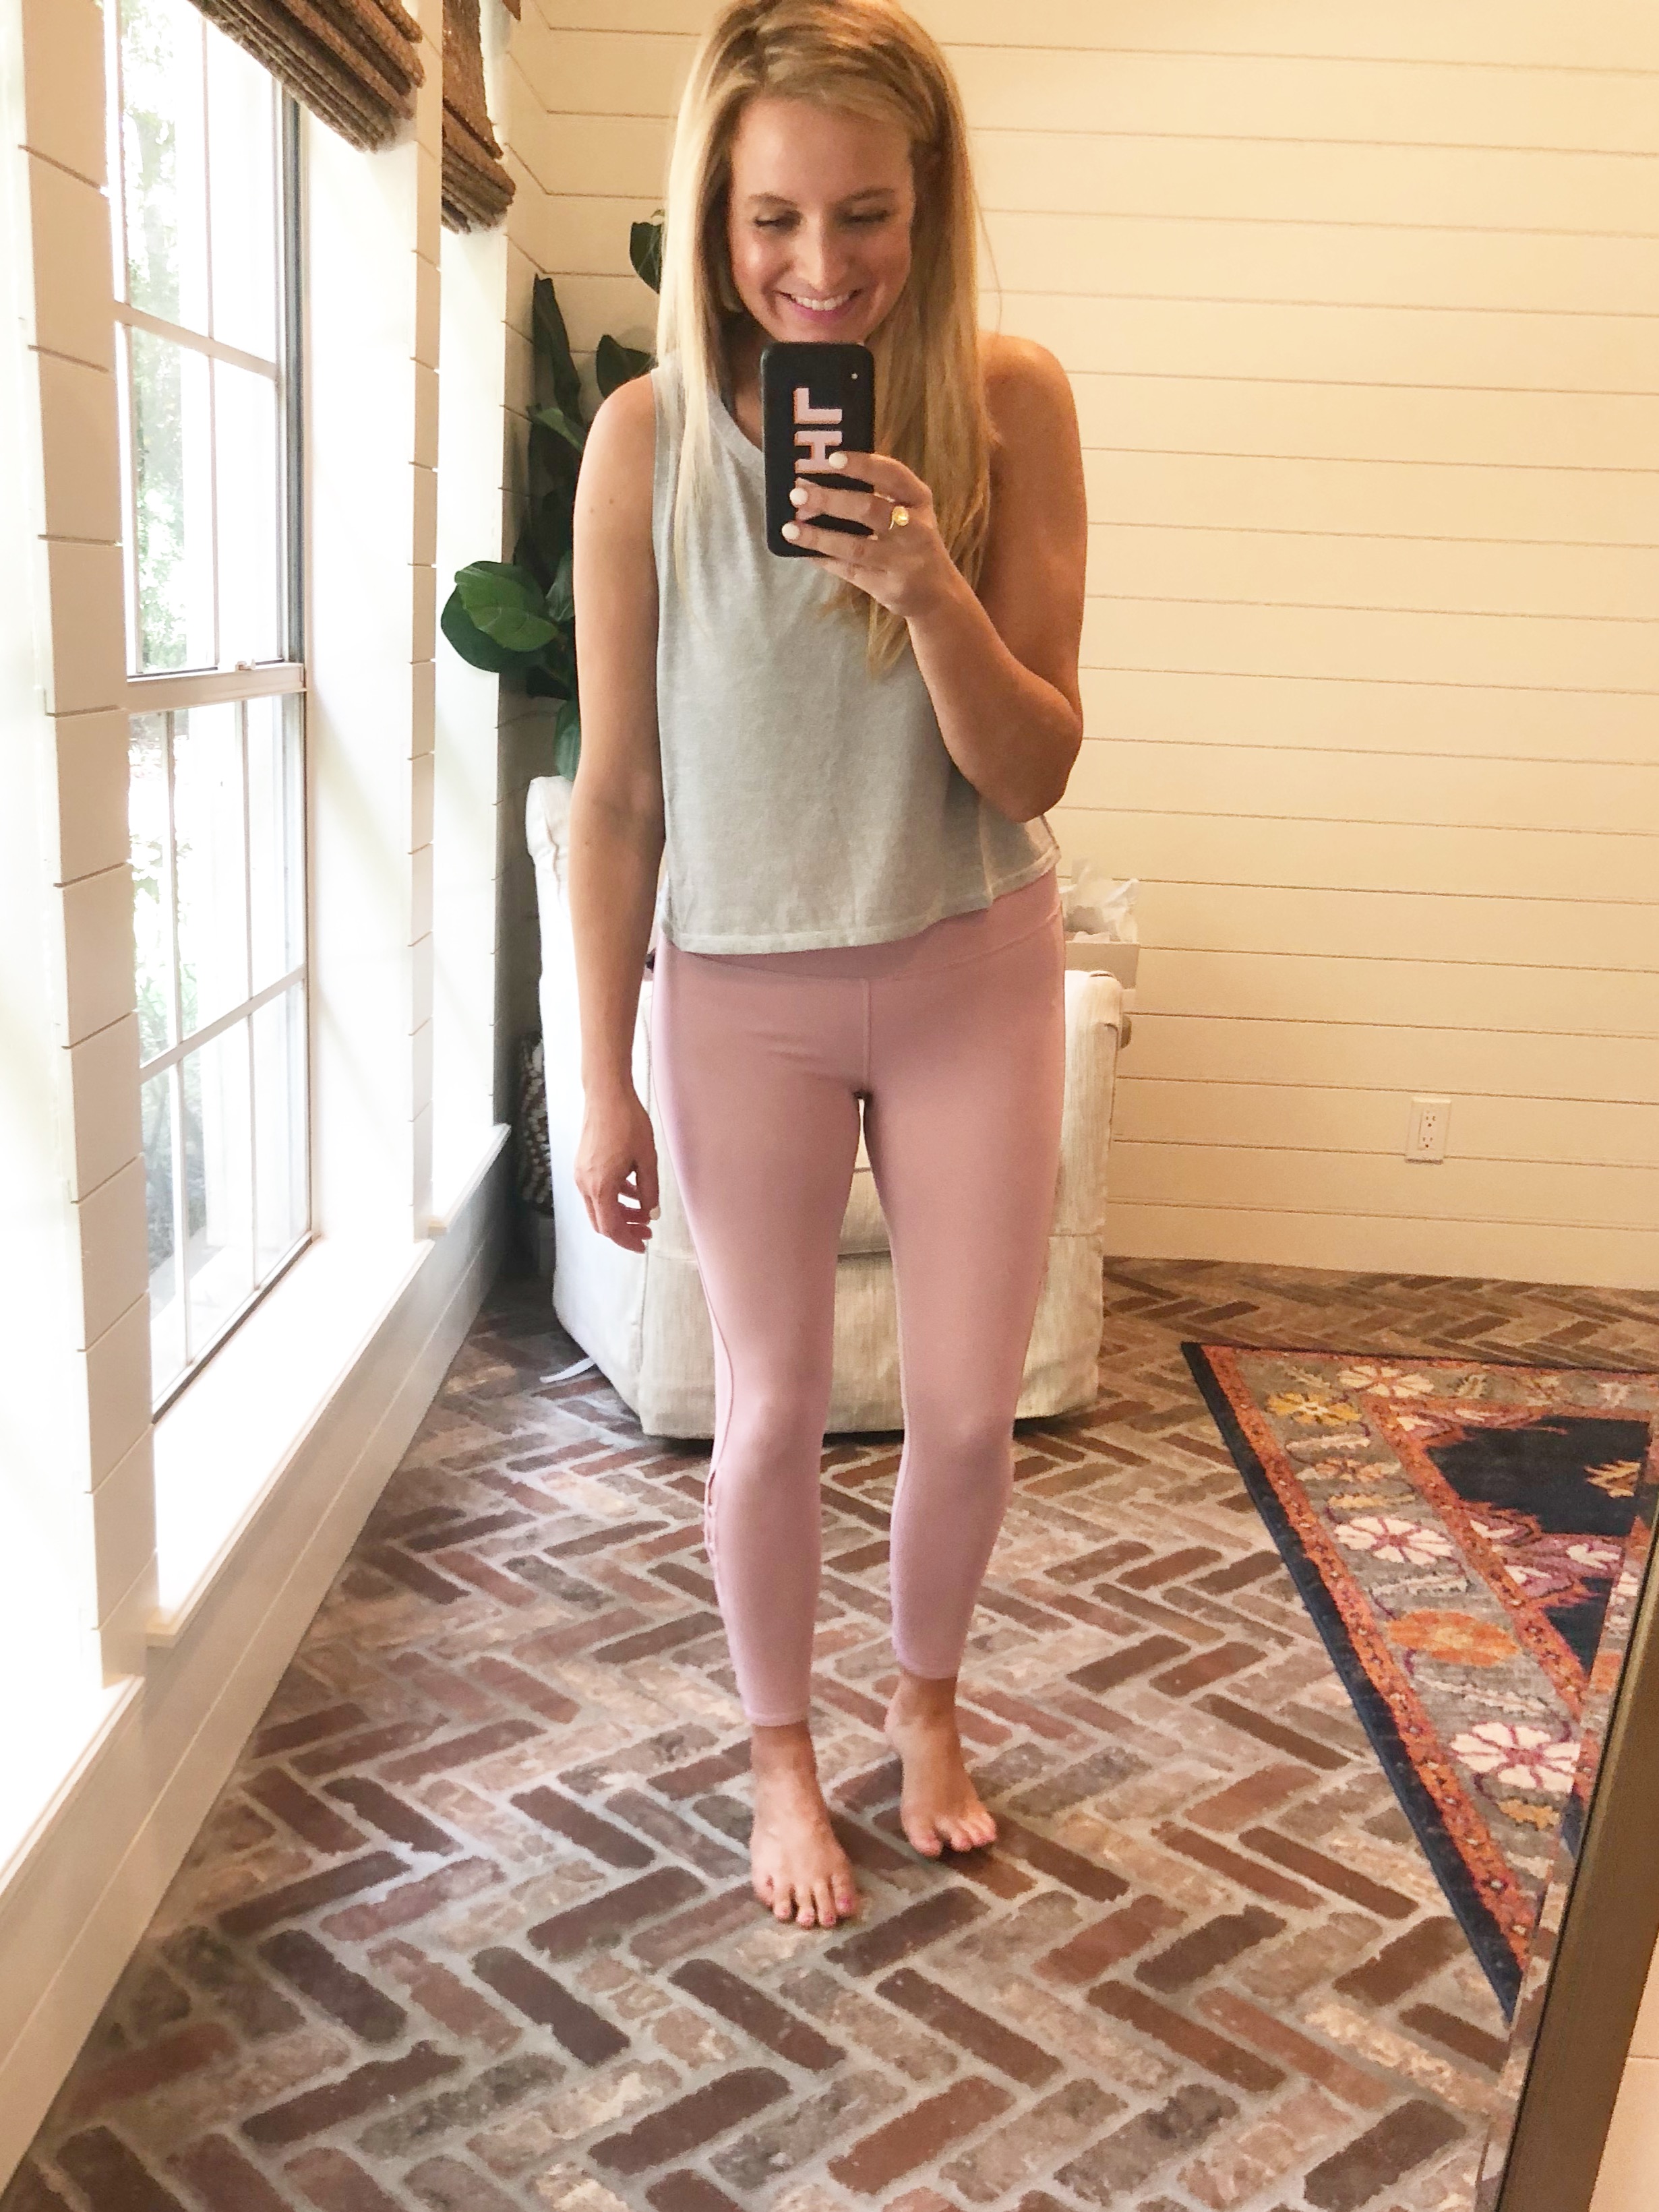 BBG results and Amazon favorites workout wear by popular Houston life and style blogger, Fancy Ashley